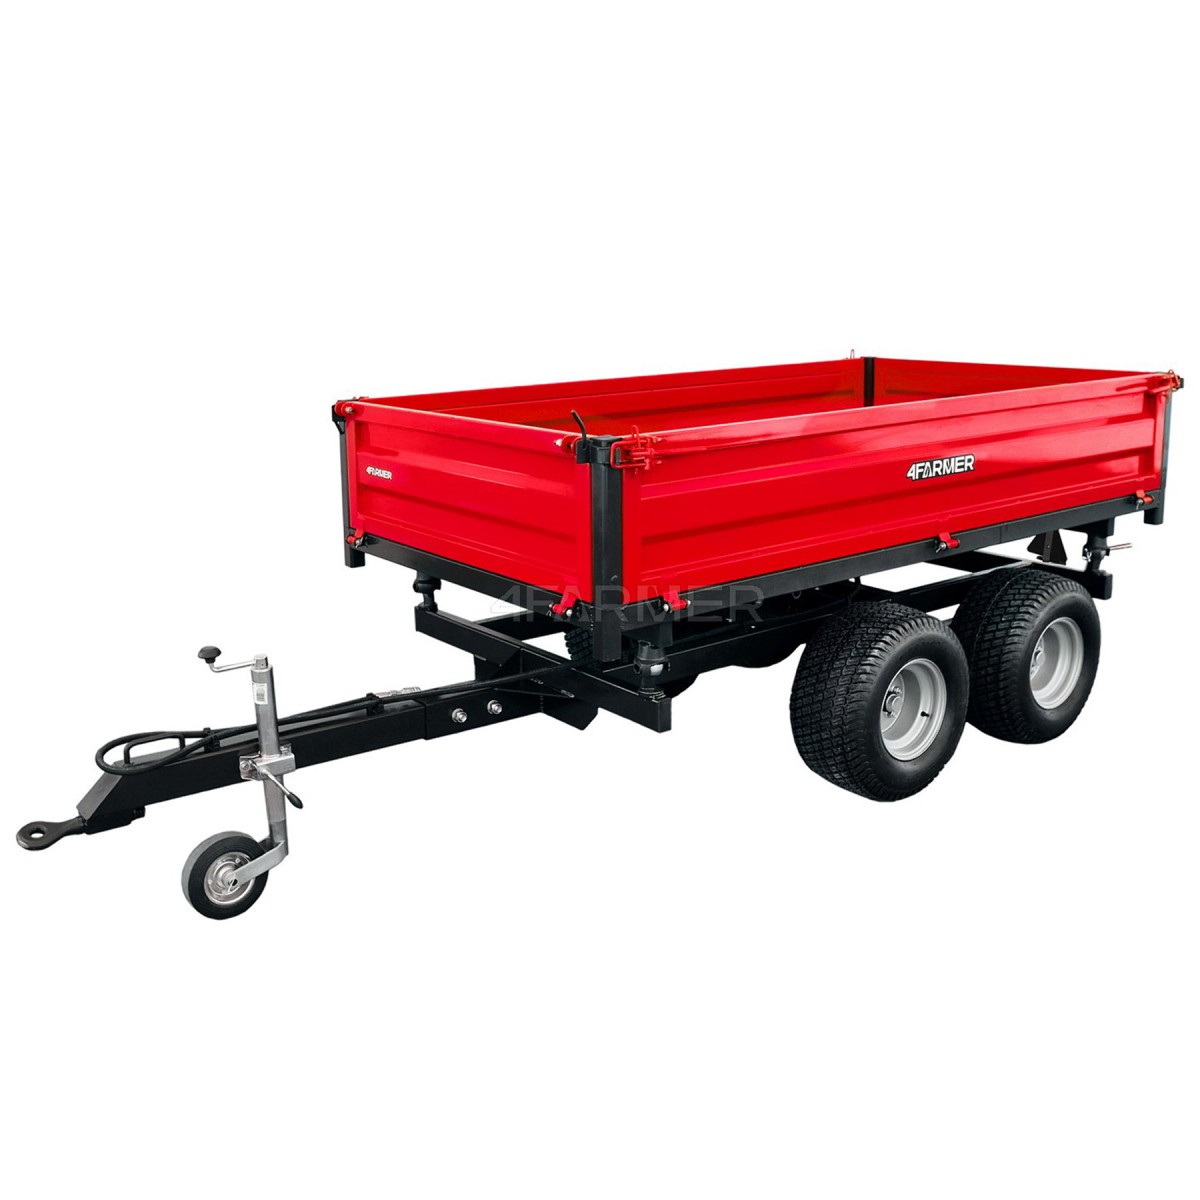 Two-axle agricultural trailer 2.5T with a 4FARMER tipper